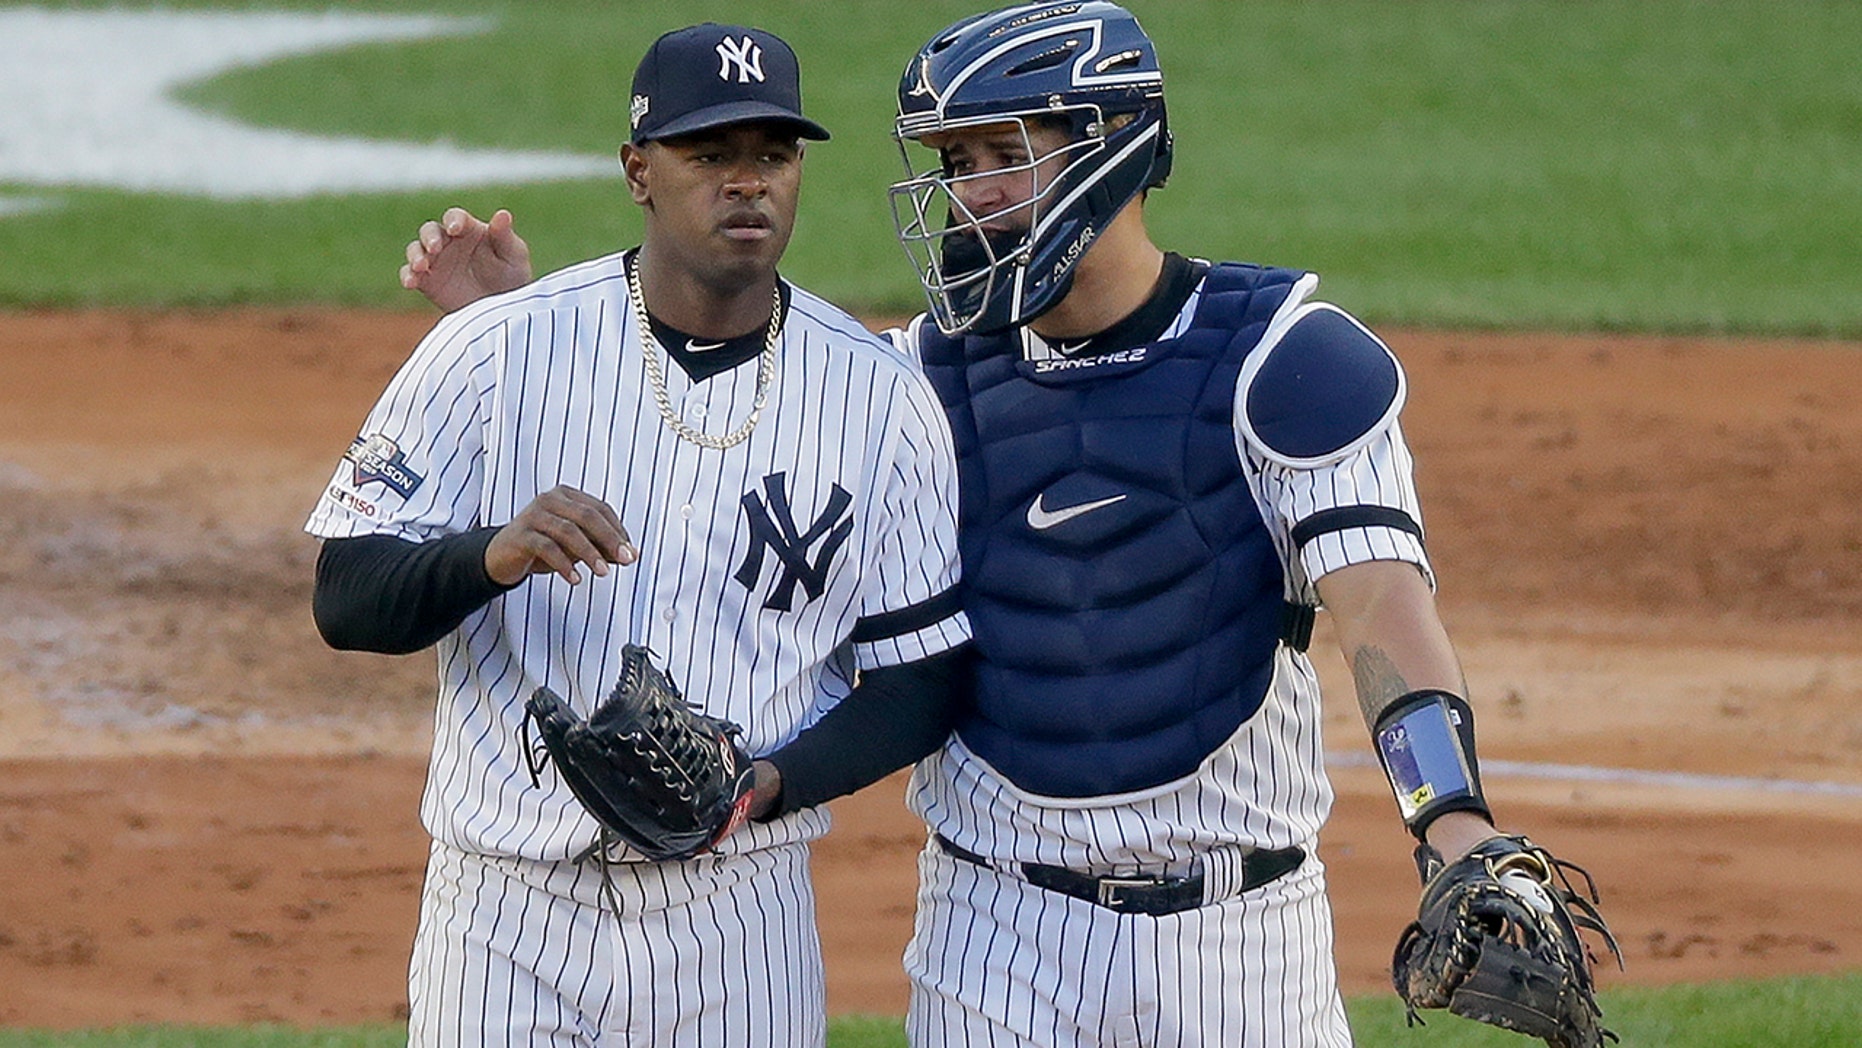 New York Yankees catcher Gary Sanchez talks on the mound with starting pitcher Luis Severino (40) during the fourth inning of Game 3 of baseball's American League Championship Series against the Houston Astros, Tuesday, Oct. 15, 2019, in New York. (AP Photo/Seth Wenig)